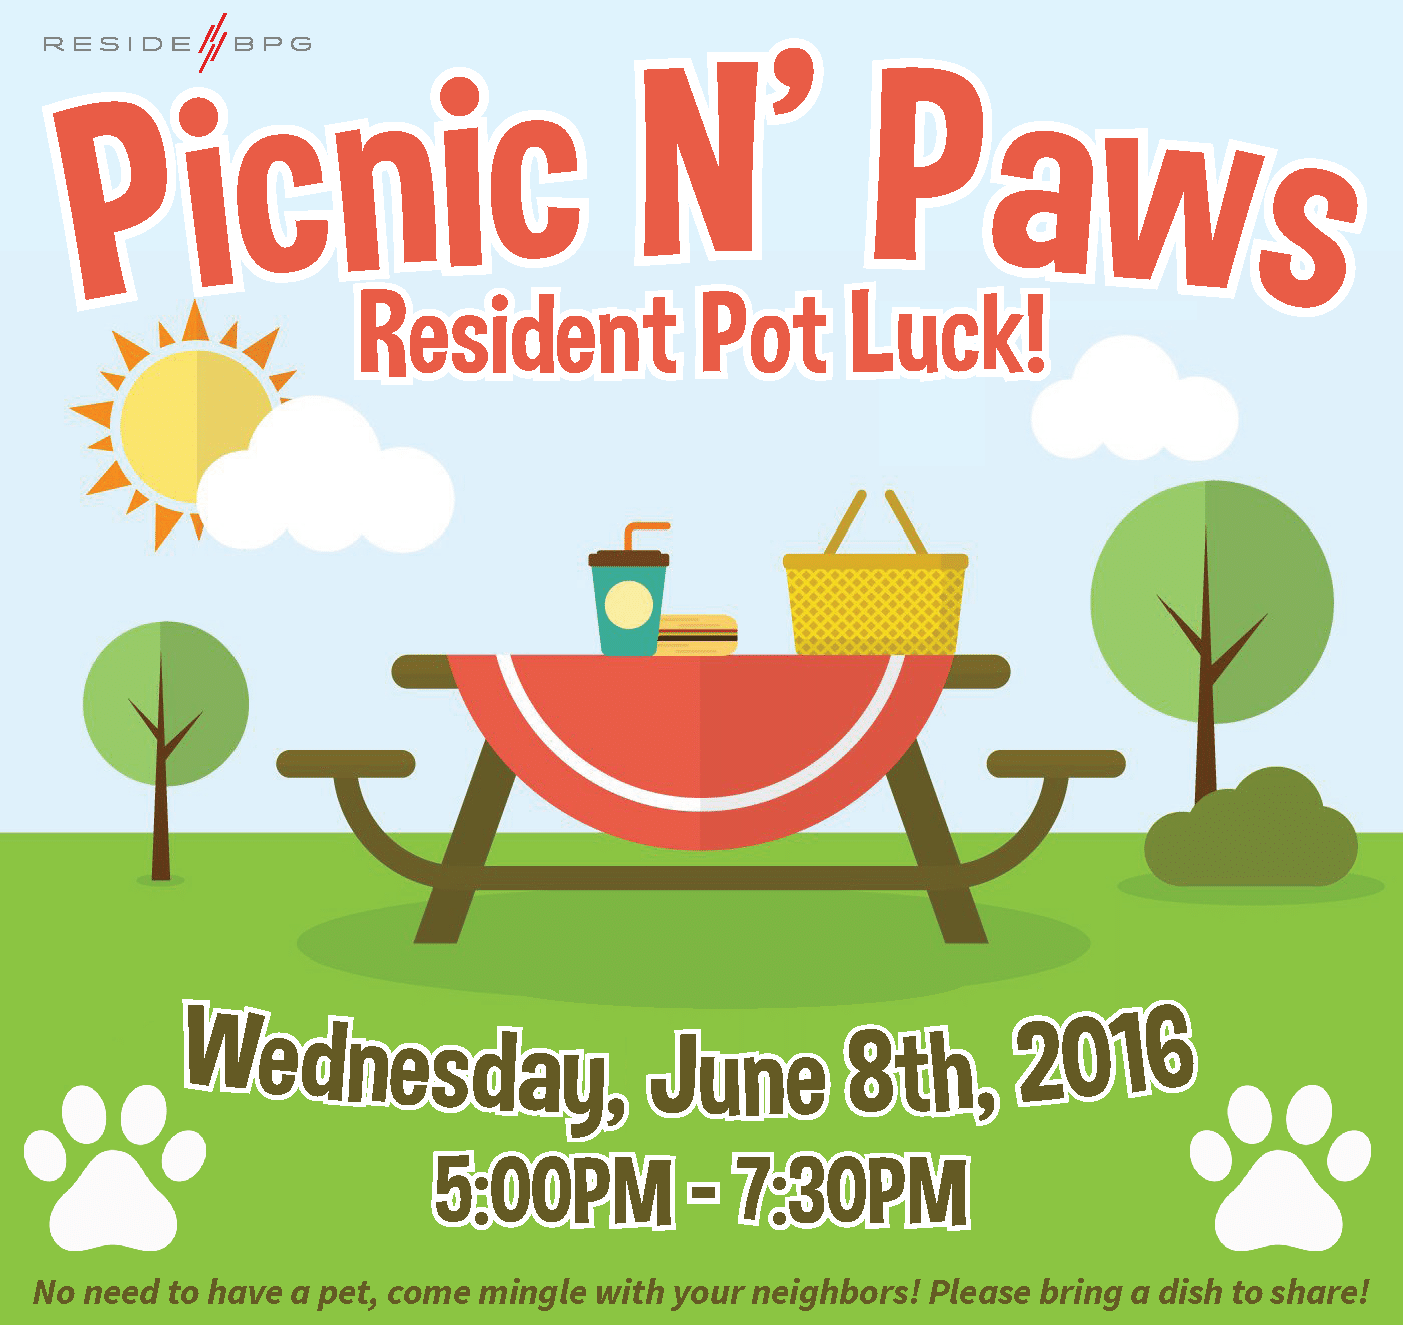 Join Us for Picnic & Paws!